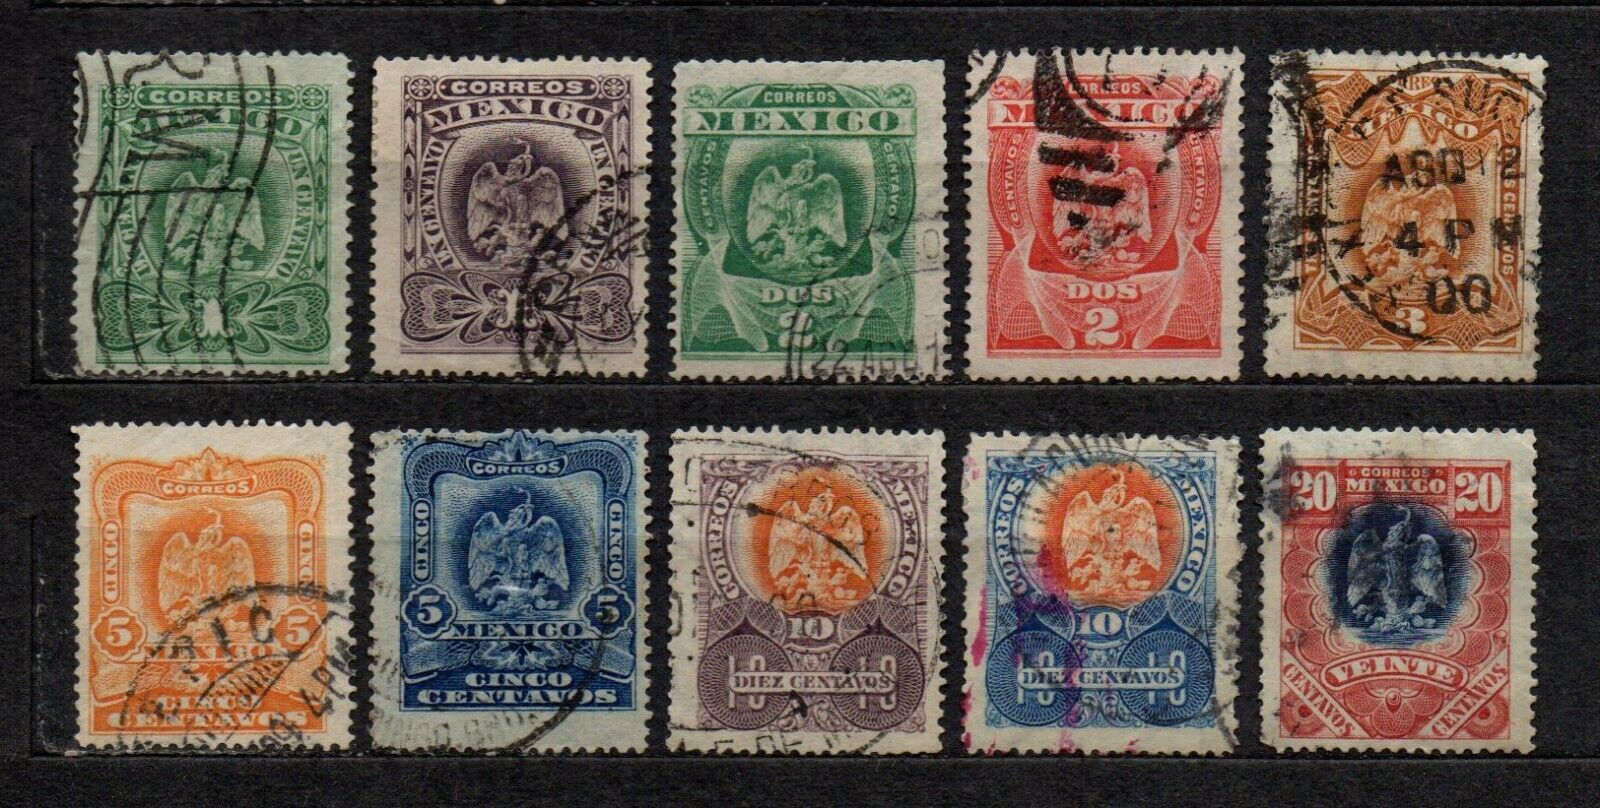 Mexico 1899 1903 lot of 10 stamps, used fair condition as seen, combine shipping Без бренда